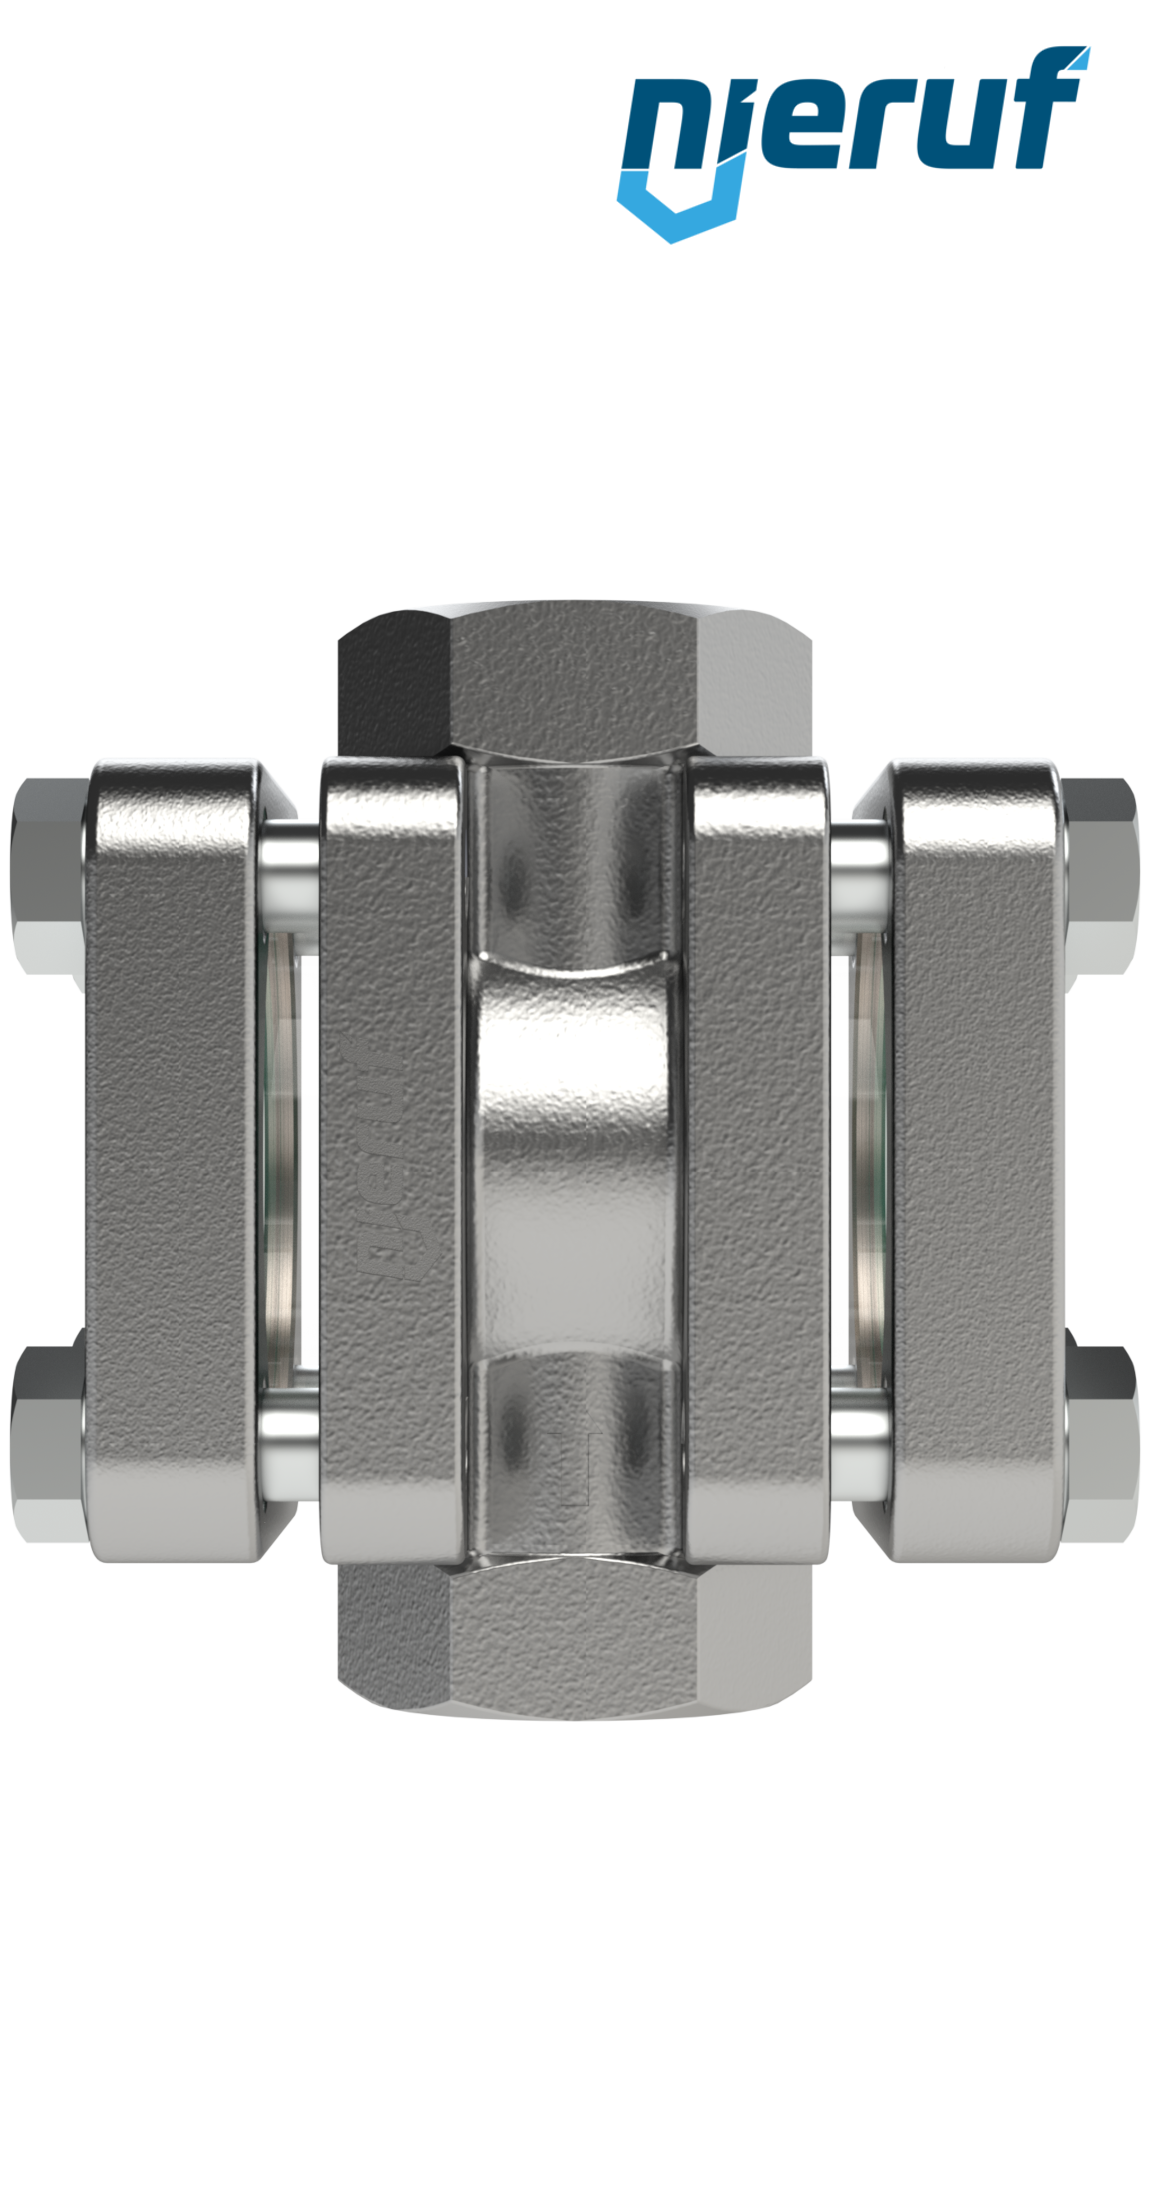 flow-through sight flow indicator DN10 - 3/8" Inch stainless steel soda lime glass design with disc